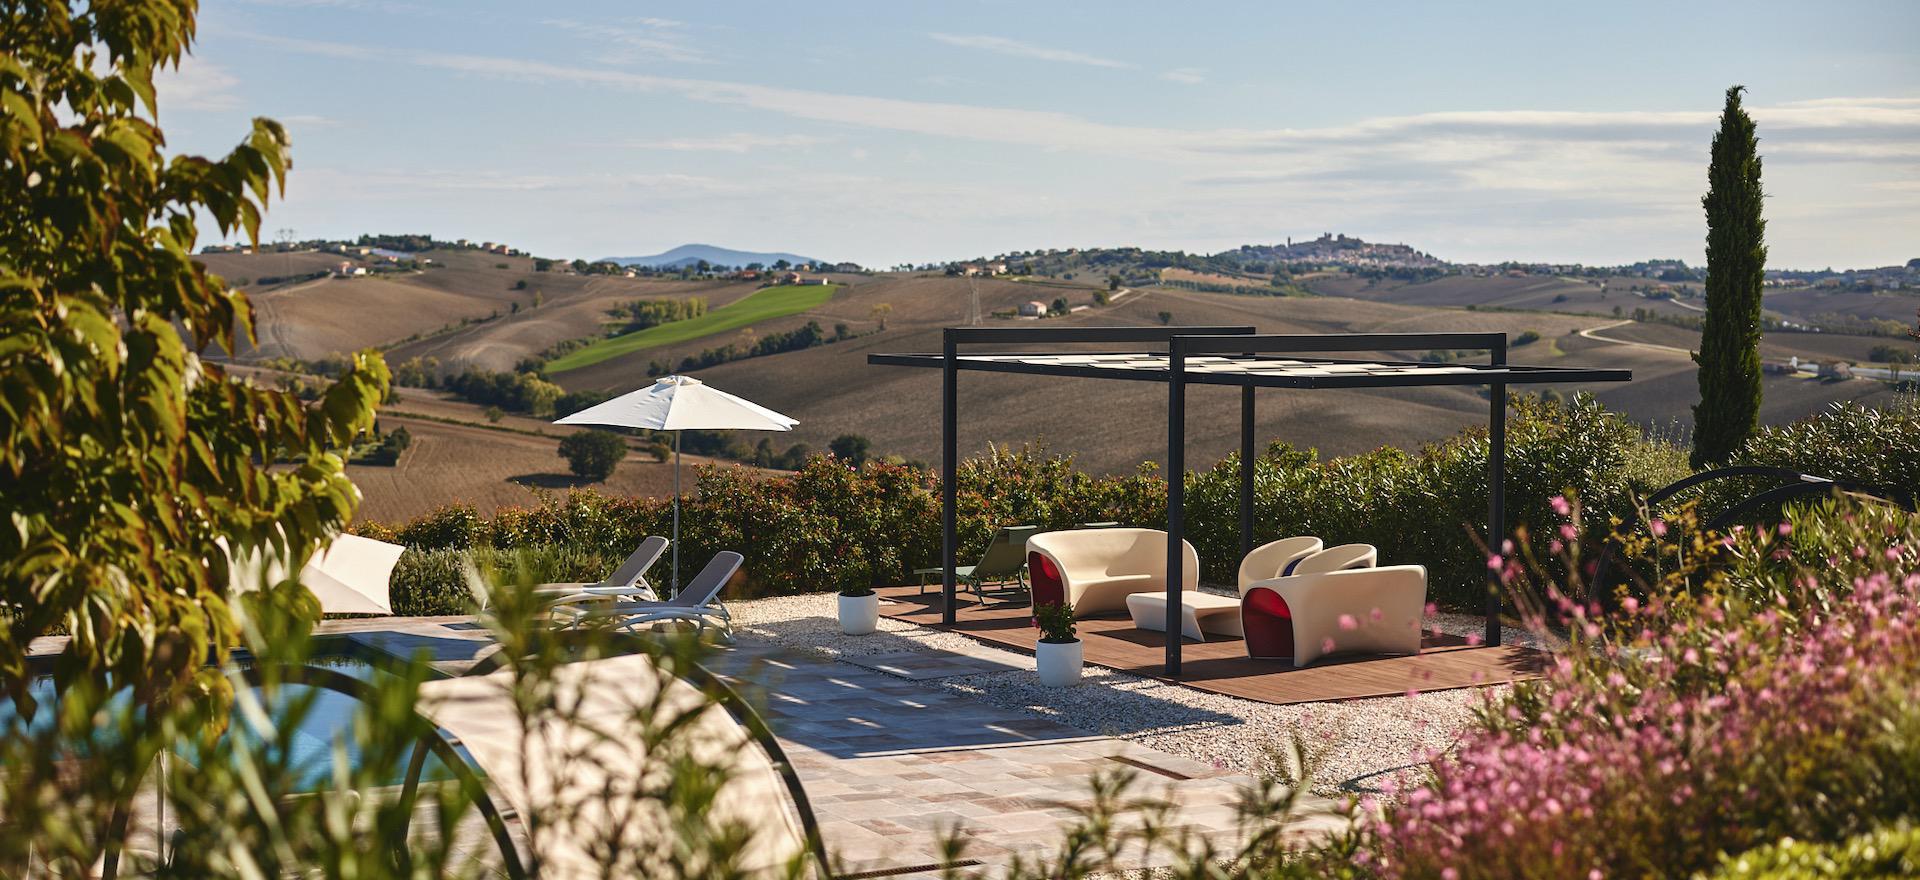 Agriturismo Le Marche Mooi country house in de Marche met bistrot